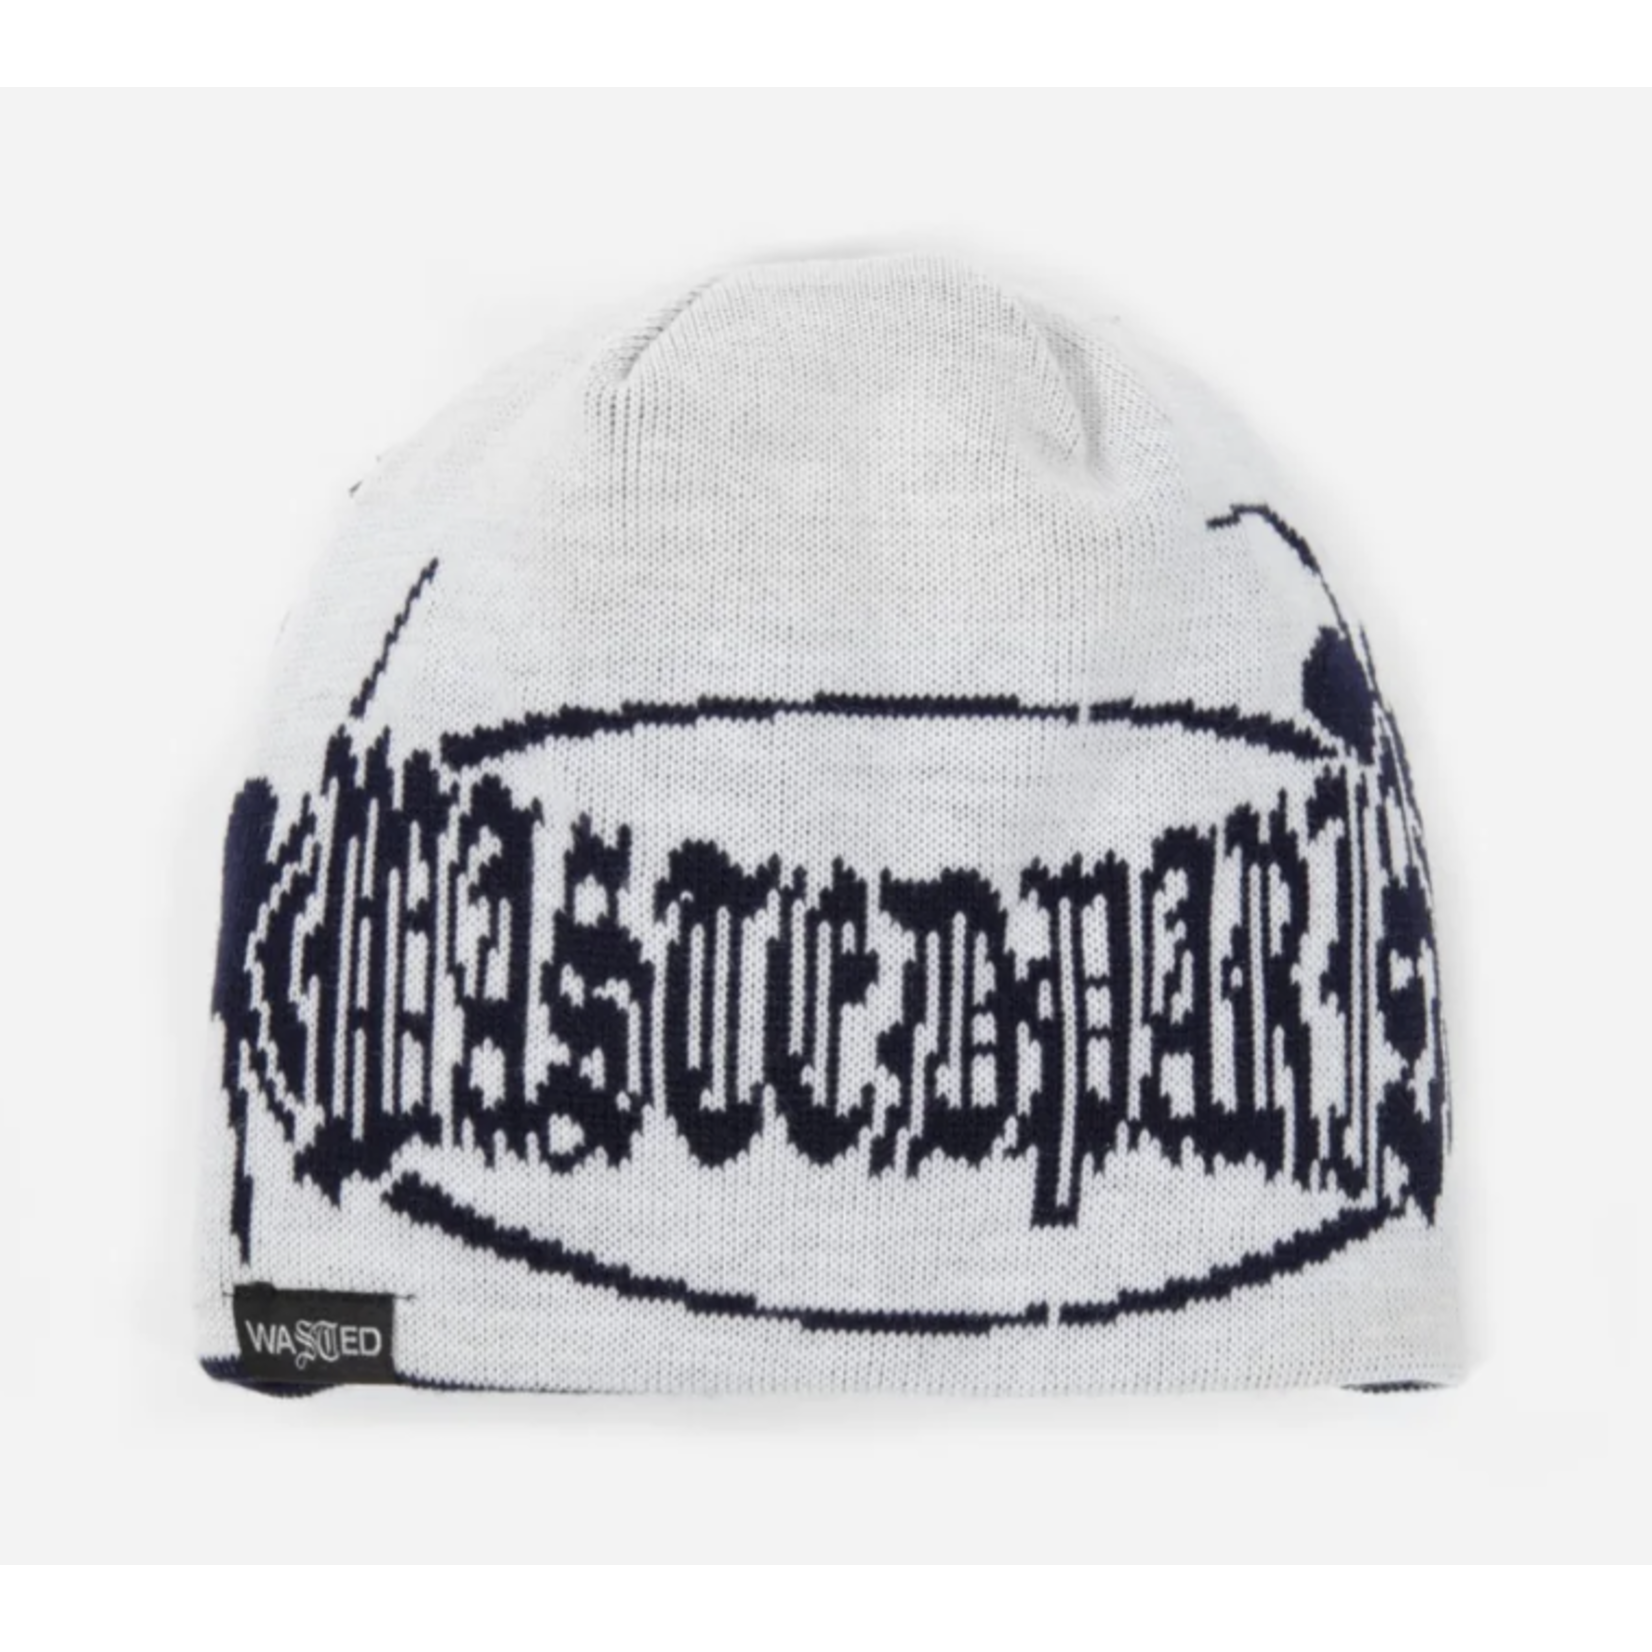 WASTED PARIS WASTED PARIS BROW BEANIE REVERSE BOILER